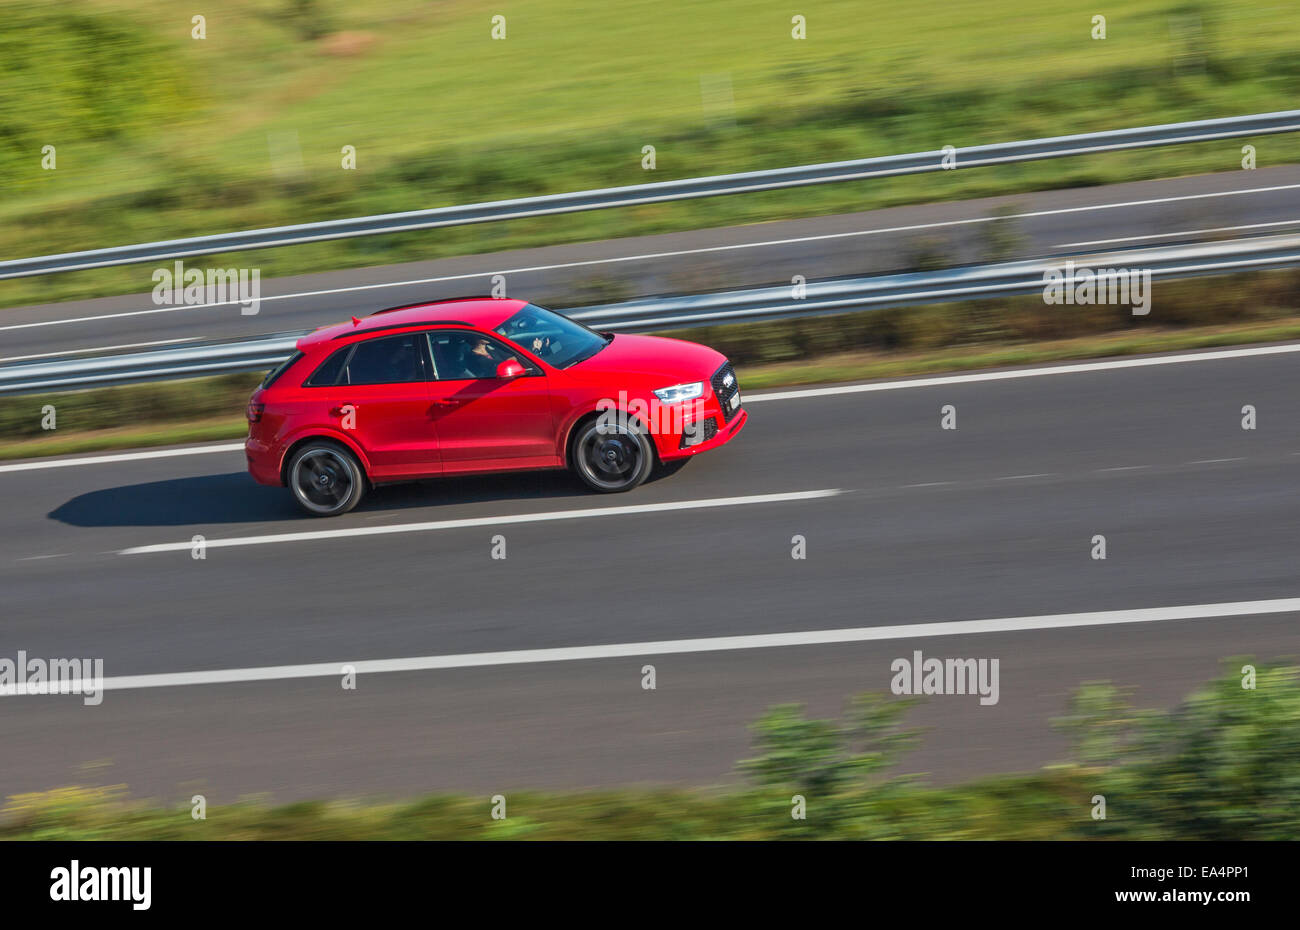 A red saloon car speeding along a motorway. Motion blur used to give a sense of speed. Stock Photo